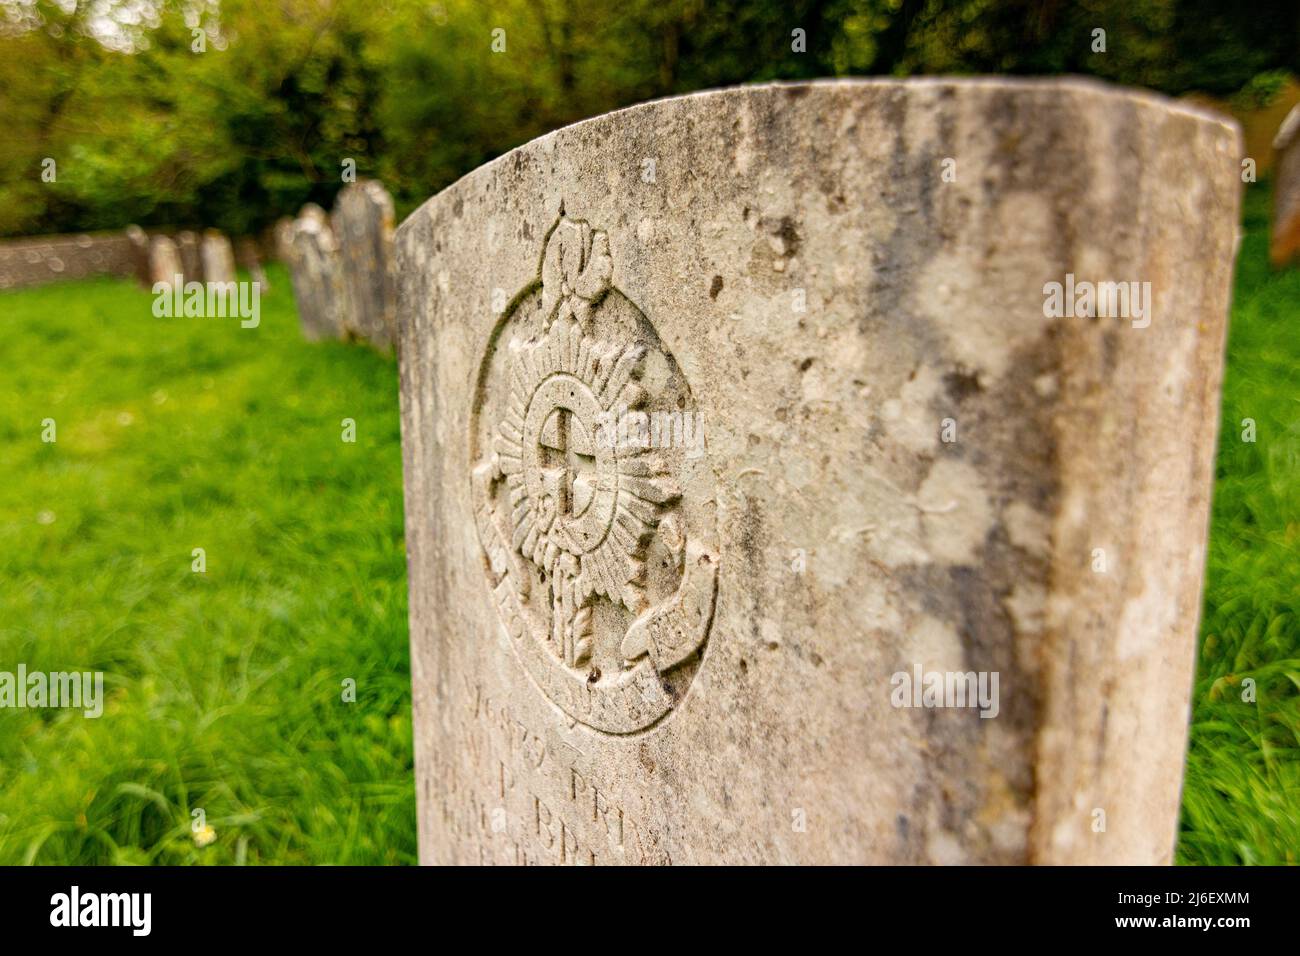 Close up of a Commonwealth War Grave headstone bearing the Royal Sussex Regiment Crest / Emblem - Findon, West Sussex, UK. Stock Photo